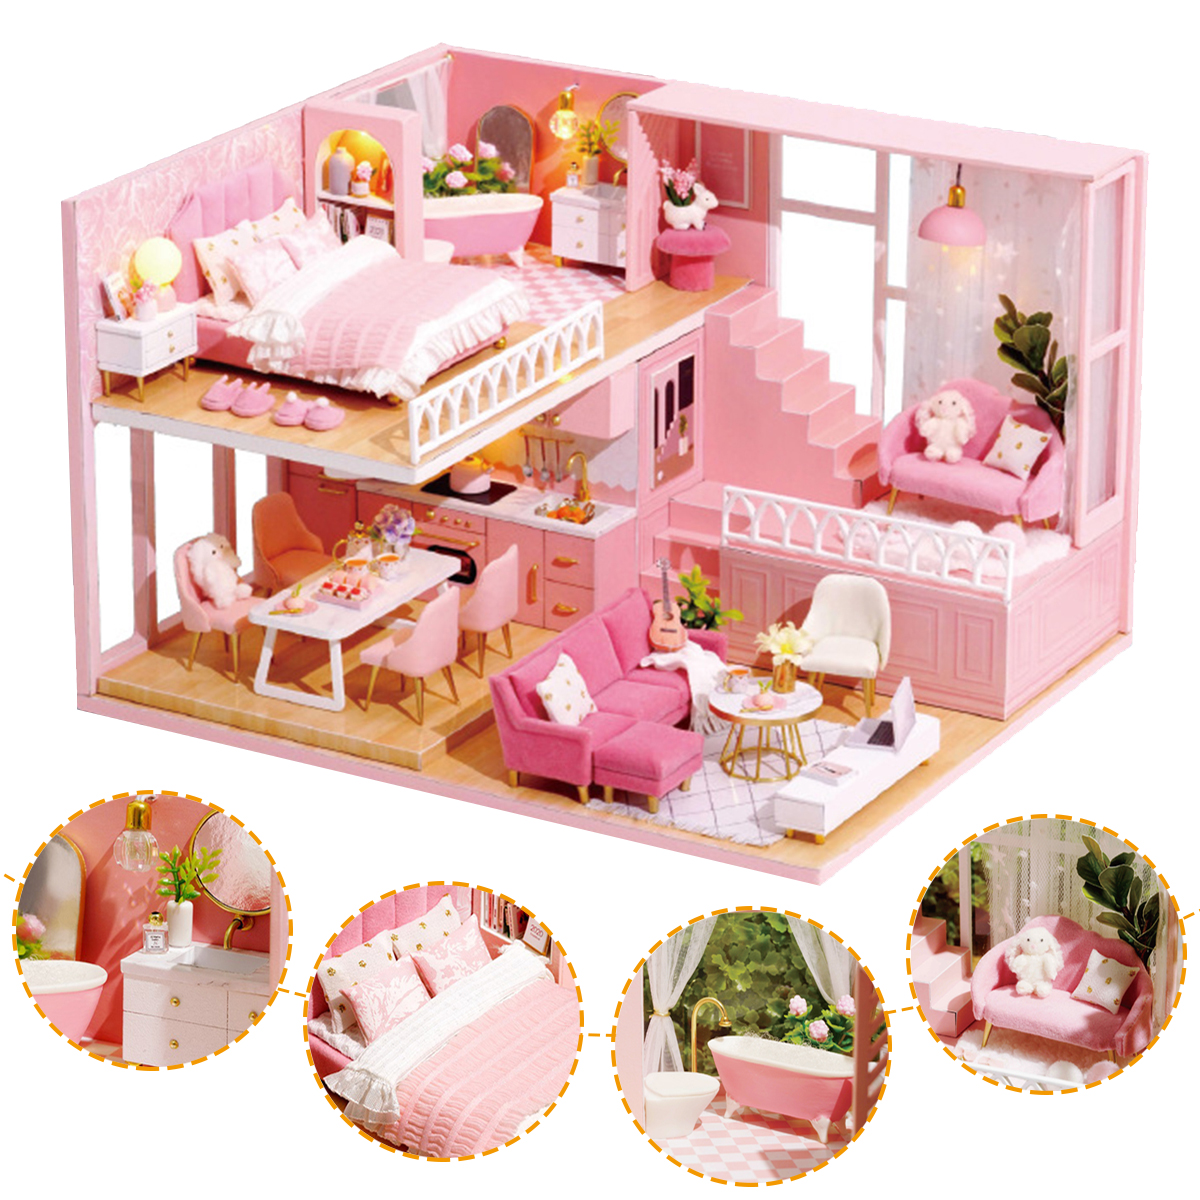 124-Wooden-3D-DIY-Handmade-Assemble-Miniature-Doll-House-Kit-Toy-with-Furniture-for-Kids-Gift-Collec-1730578-4